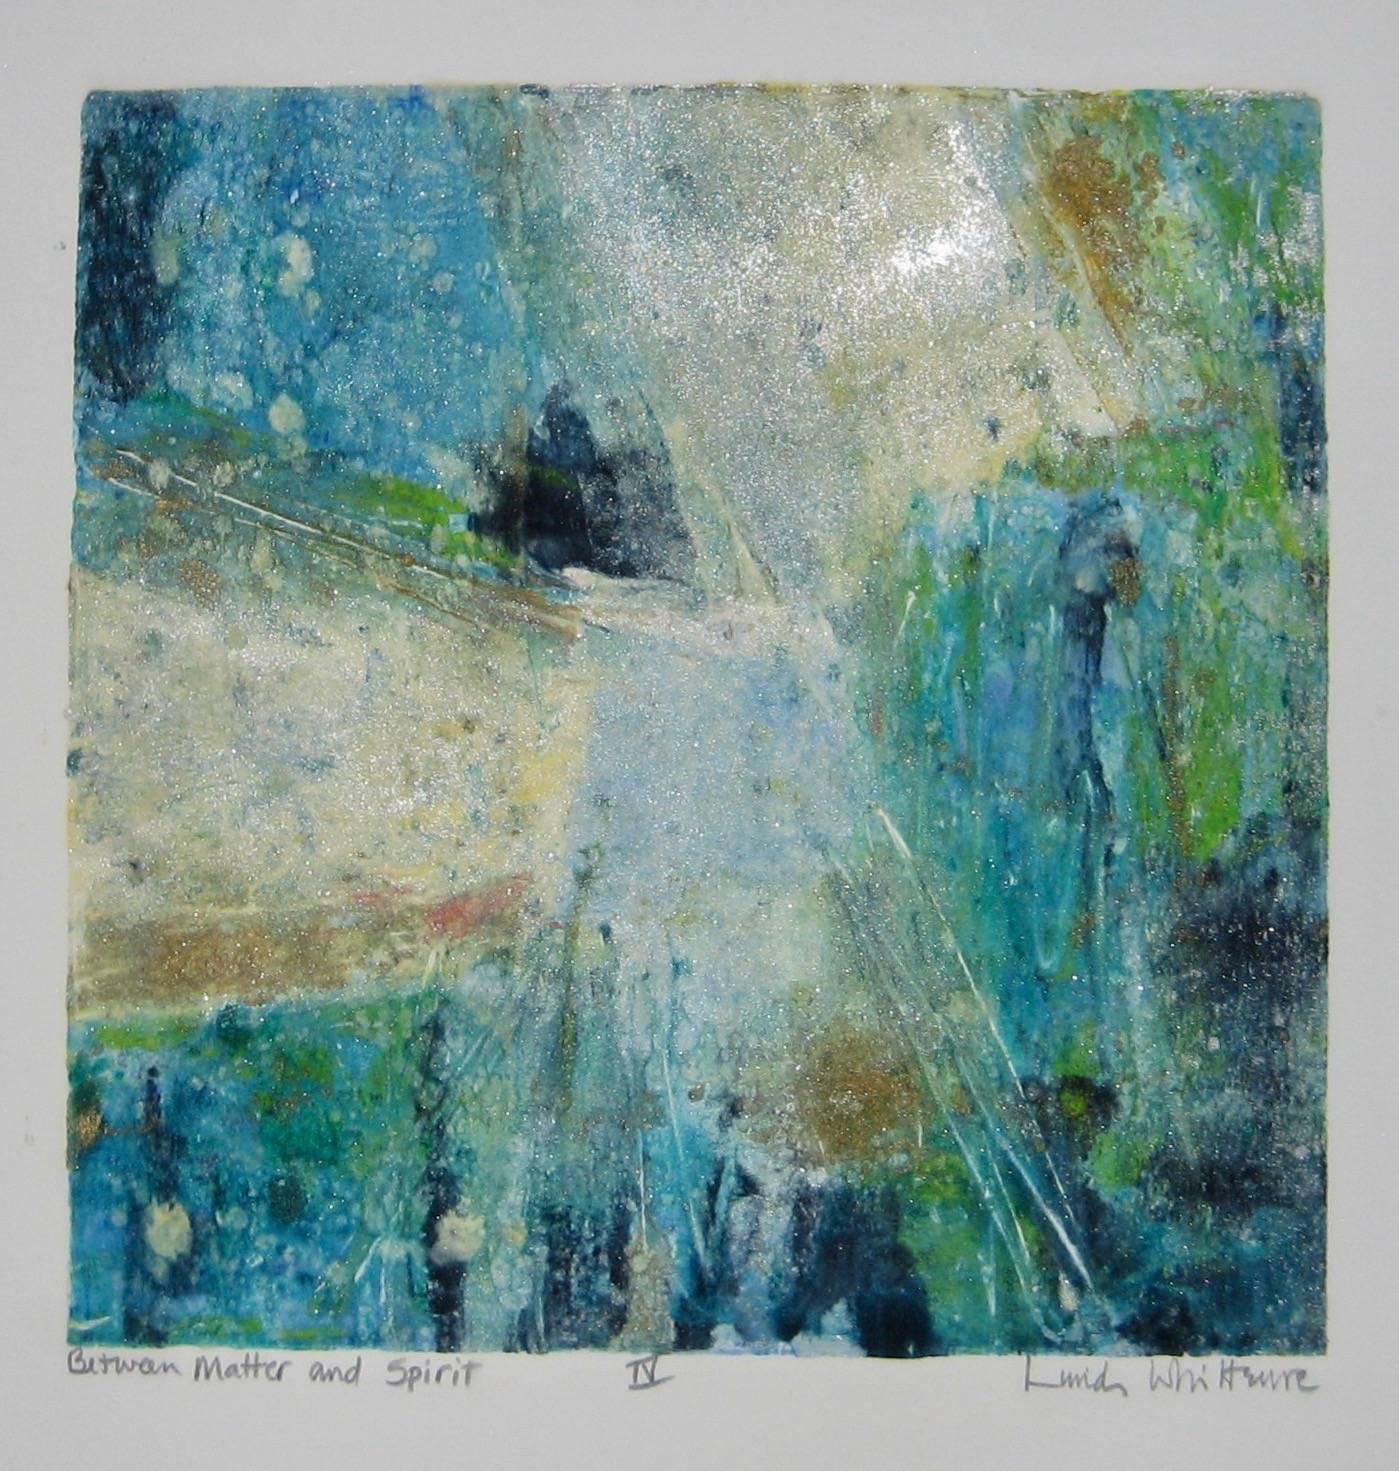 Rich blues and sea greens are streaked with pearlescent accents that play across this beautiful abstract original work "Between matter and Spirit IV" by master print maker Linda Whittemore. This mixed media viscosity monotype displays all of the